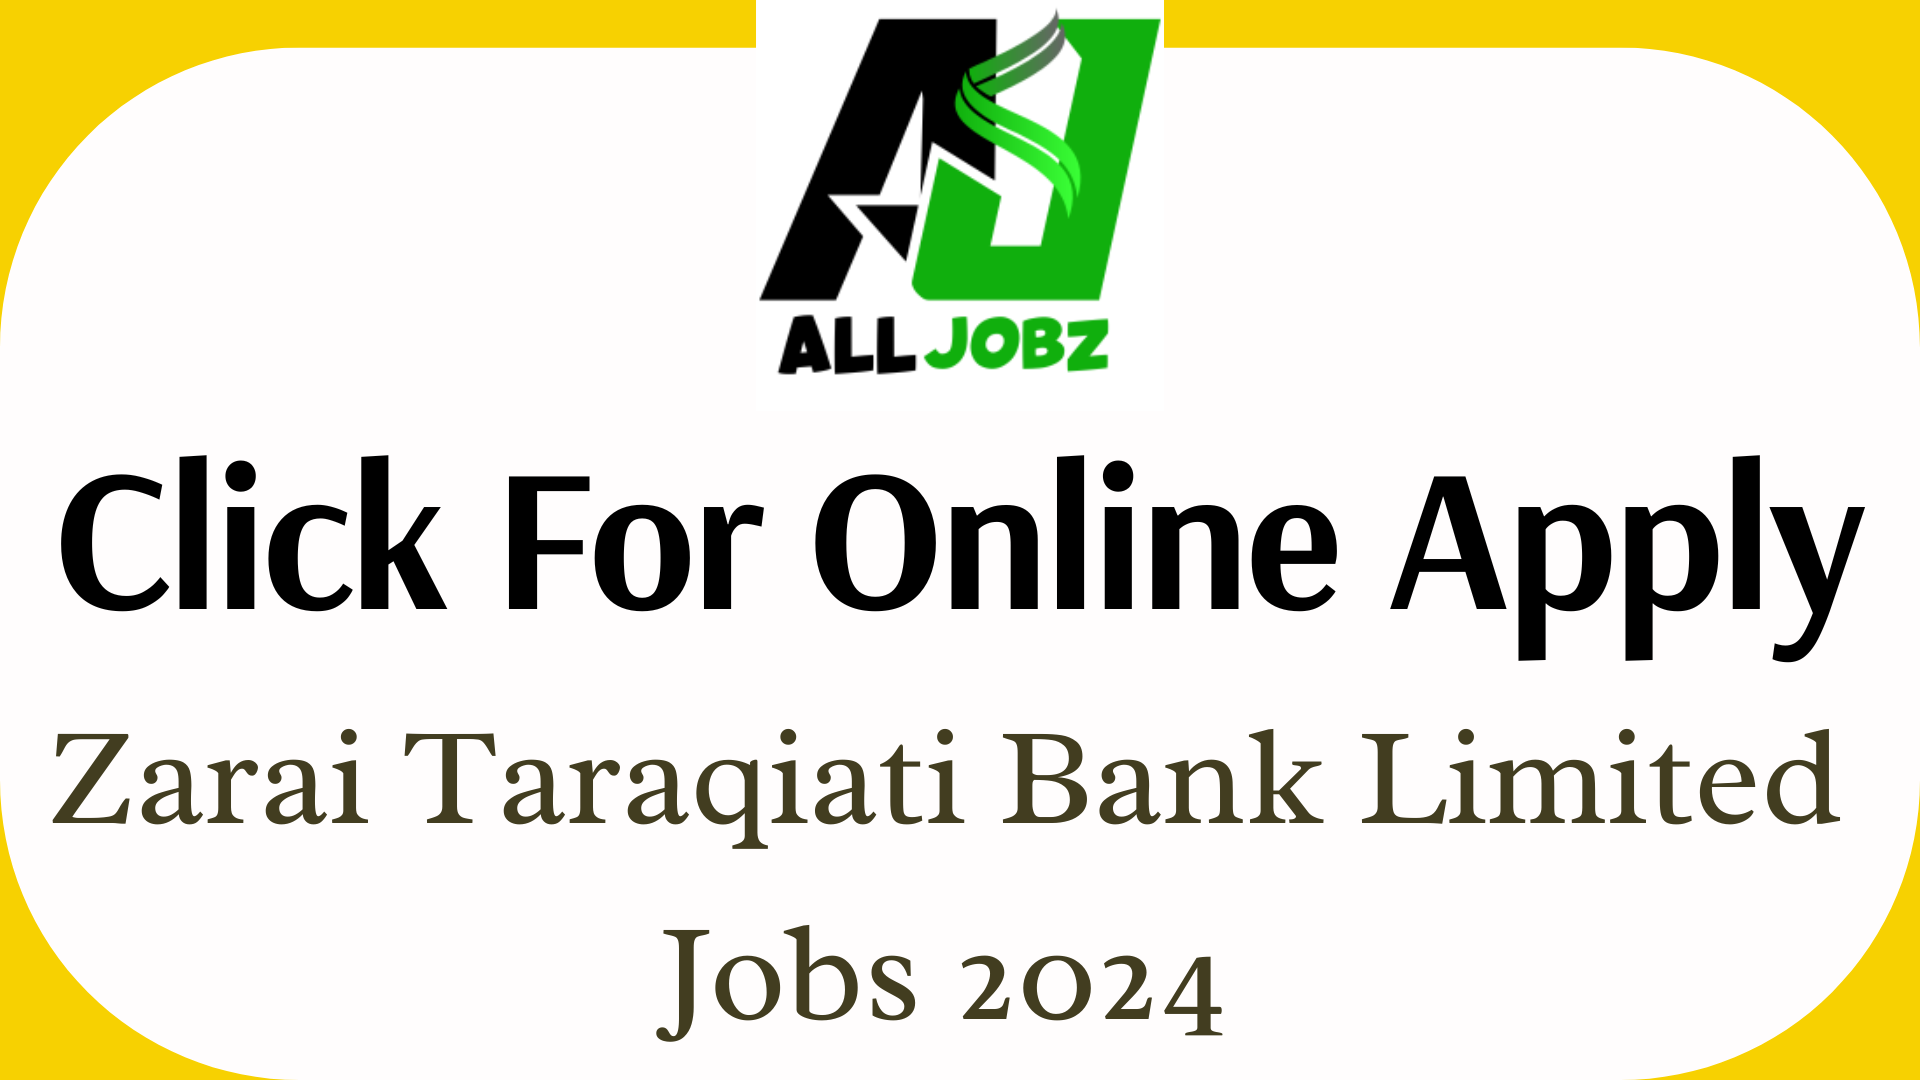 Career Opportunities At Zarai Taraqiati Bank Limited, Zarai Taraqiati Bank Jobs 2024, Ztbl Jobs Apply Online, Ztbl Jobs Officer Grade 3, Ztbl Jobs 2024 Online Apply, Www.kssl.ztbl.com.pk Jobs Online Apply, Ots Ztbl Jobs, Ztbl Rozee Pk, Zarai Taraqiati Bank Is Govt Or Private, Career Opportunities At Zarai Taraqiati Bank Limited, A 'Aaa-Rated Renowned Specialized Financial Institution With A Wide Network Of Over 500 Branches Across The Country, Is Inviting Applications From Energetic And Challenge-Oriented Professionals With A Proven Track Record And The Capacity To Perform As A Catalyst For Transformation In A Challenging Environment. Career Opportunities At Zarai Taraqiati Bank Limited, Zarai Taraqiati Bank Jobs 2024, Ztbl Jobs Apply Online, Ztbl Jobs Officer Grade 3, Ztbl Jobs 2024 Online Apply. The Individuals Who Fulfill The Basic Eligibility Criteria May Apply For The Contractual Position, Based At Ztbl Head Office, Islamabad.